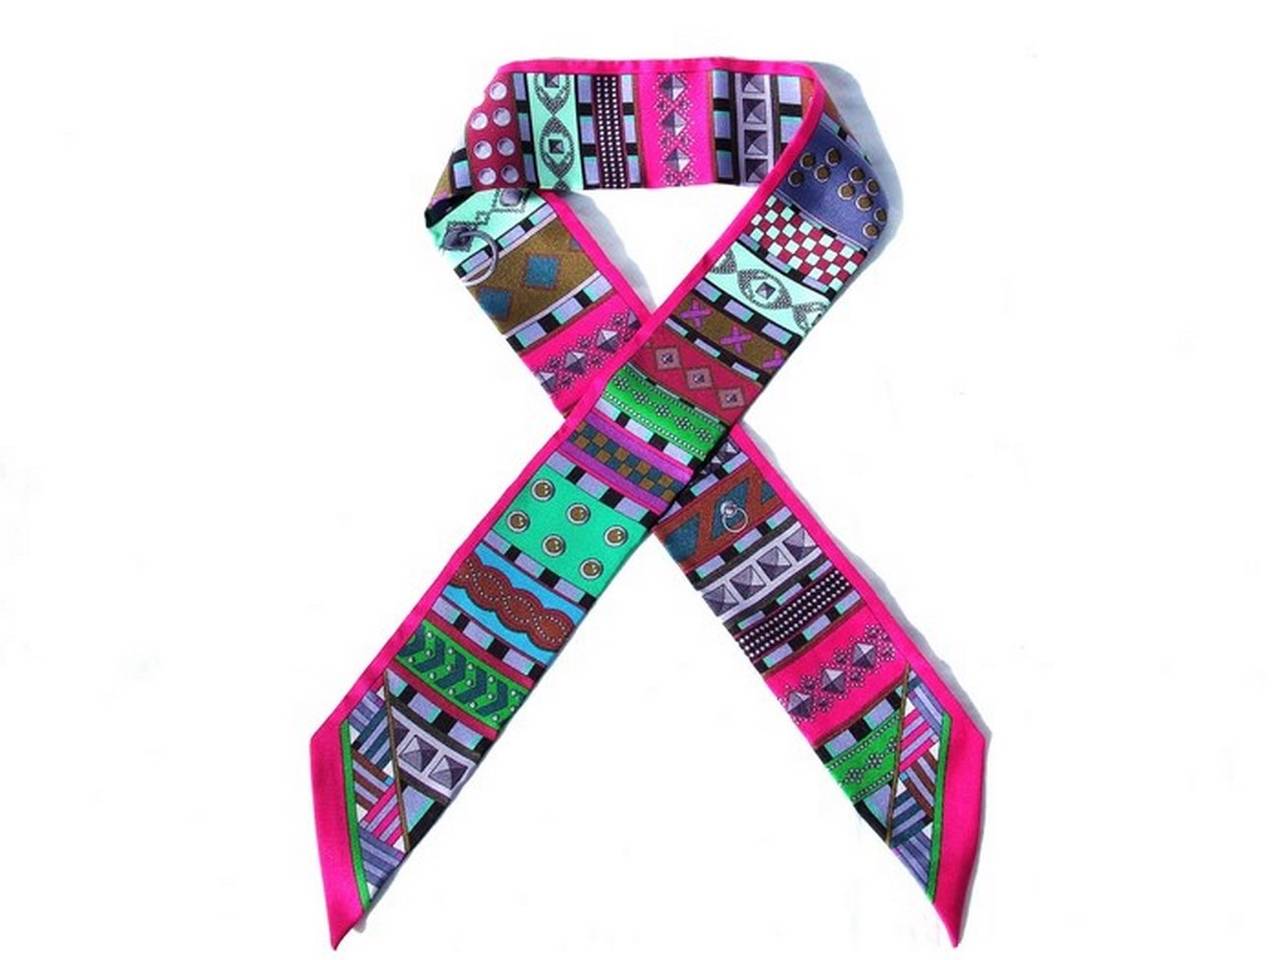 BEAUTIFUL AUTHENTIC HERMES SCARF

 
TWILLY

 
Pattern: Colliers de chiens

 
Made in France, design by Virginie JAMIN

 
Made of 100% Silk

 
Colors: Fuschia (pink), Green, Blue

 
Measurements: 85 x 5 cm (33,4 x 2 inches)

